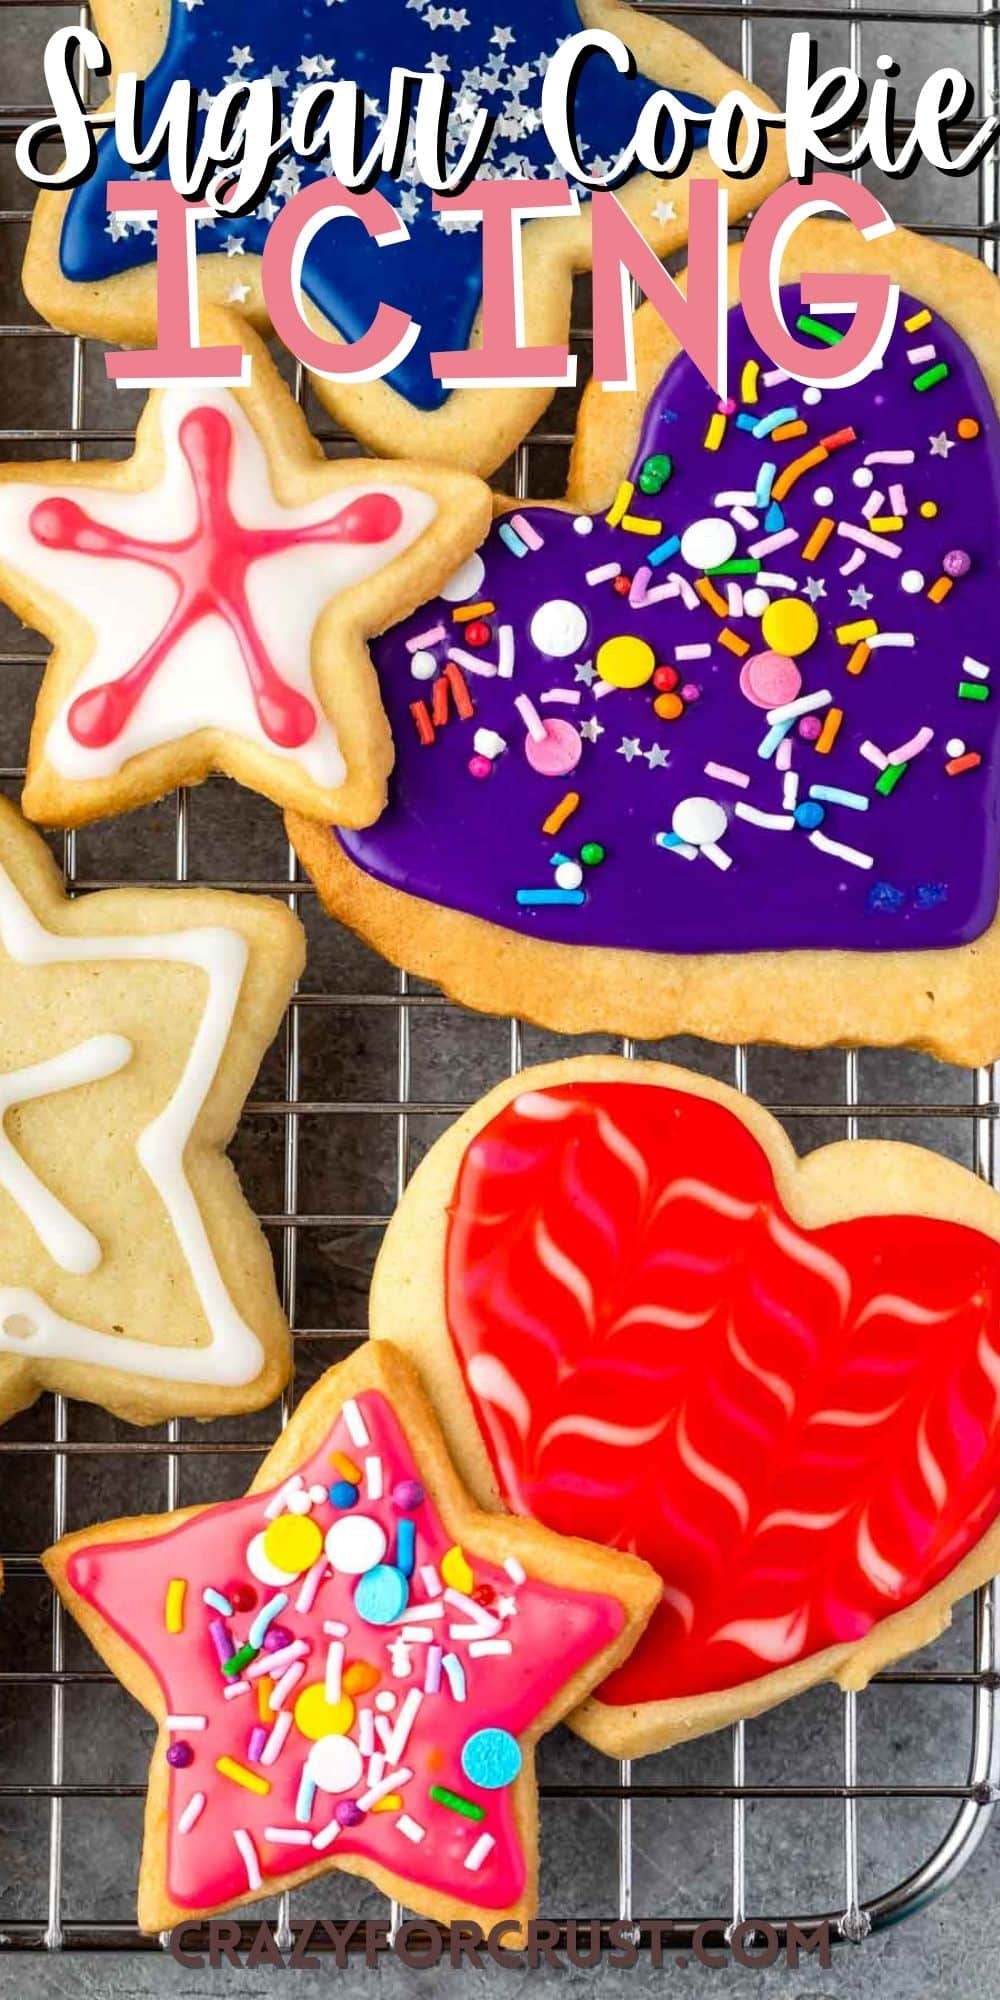 sugar cookies with various colored icing and sprinkles on top with words on top